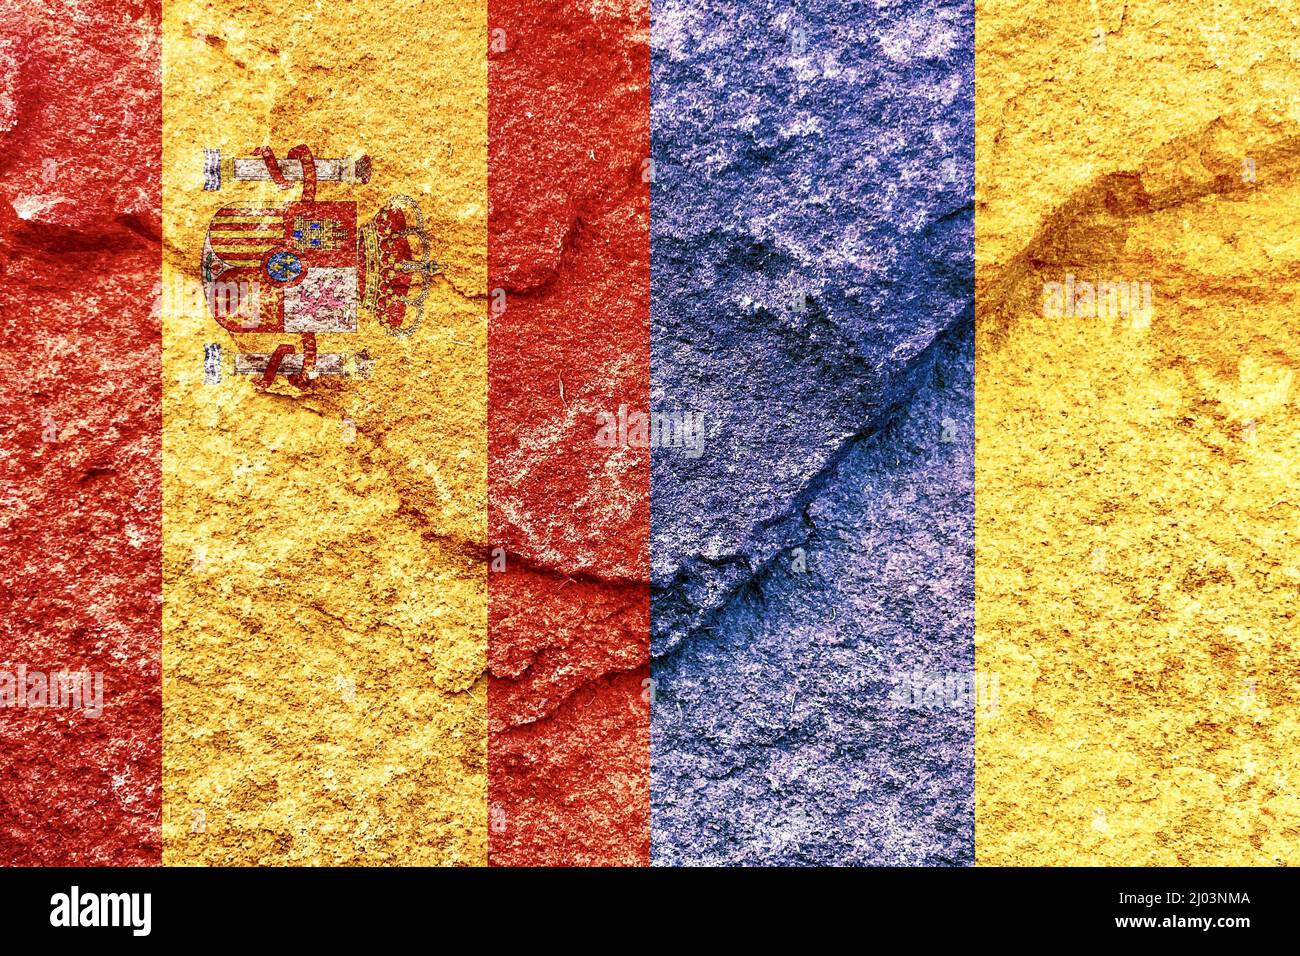 Vintage Spain and Ukraine vertical national flags isolated together on solid rock wall background Stock Photo